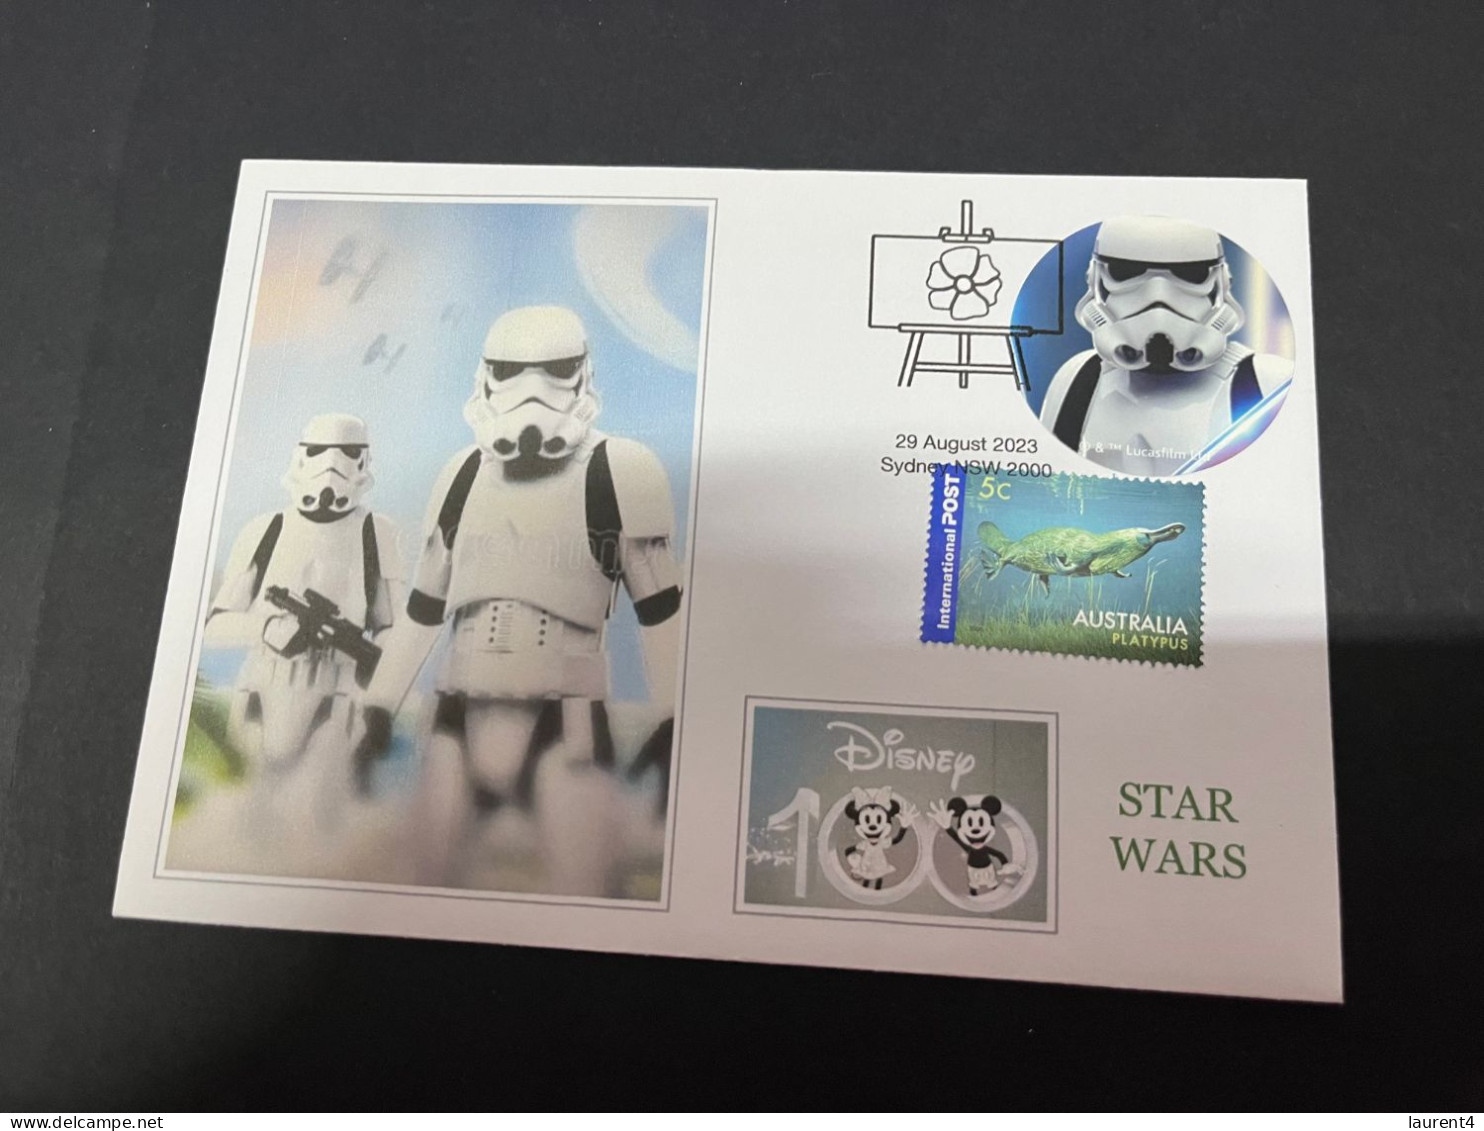 4-10-2023 (3 U 17) Australia - 2023 - Star War Sticker On Cover - Disney Centenary 29-8-2023 (from Stamp Pack) - Covers & Documents